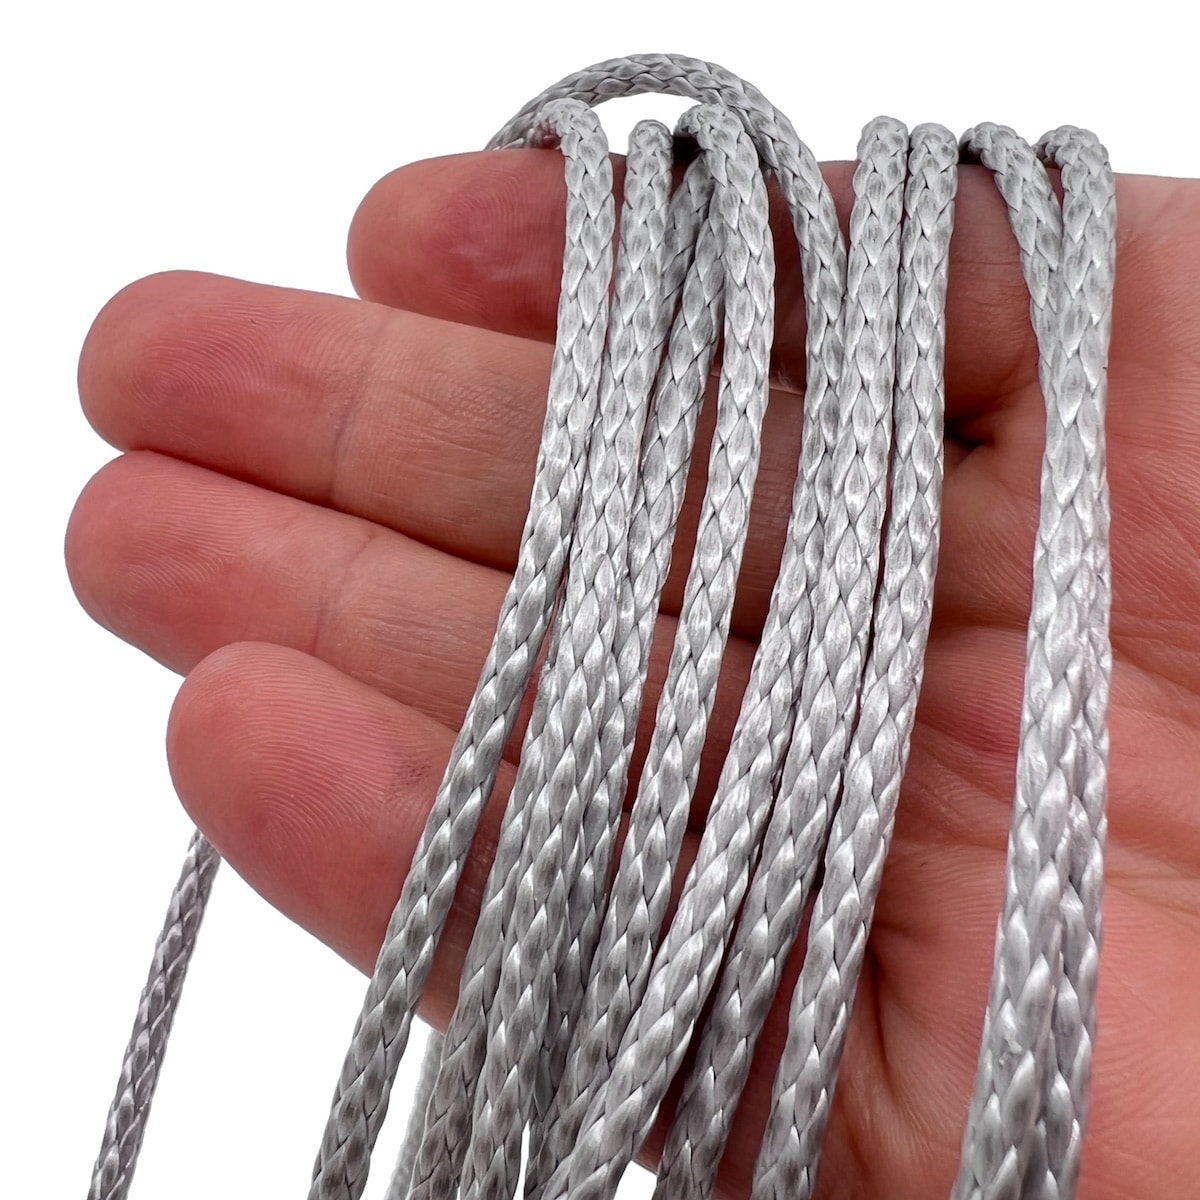 Amsteel is one of the lightest and strongest ropes for hammock suspension